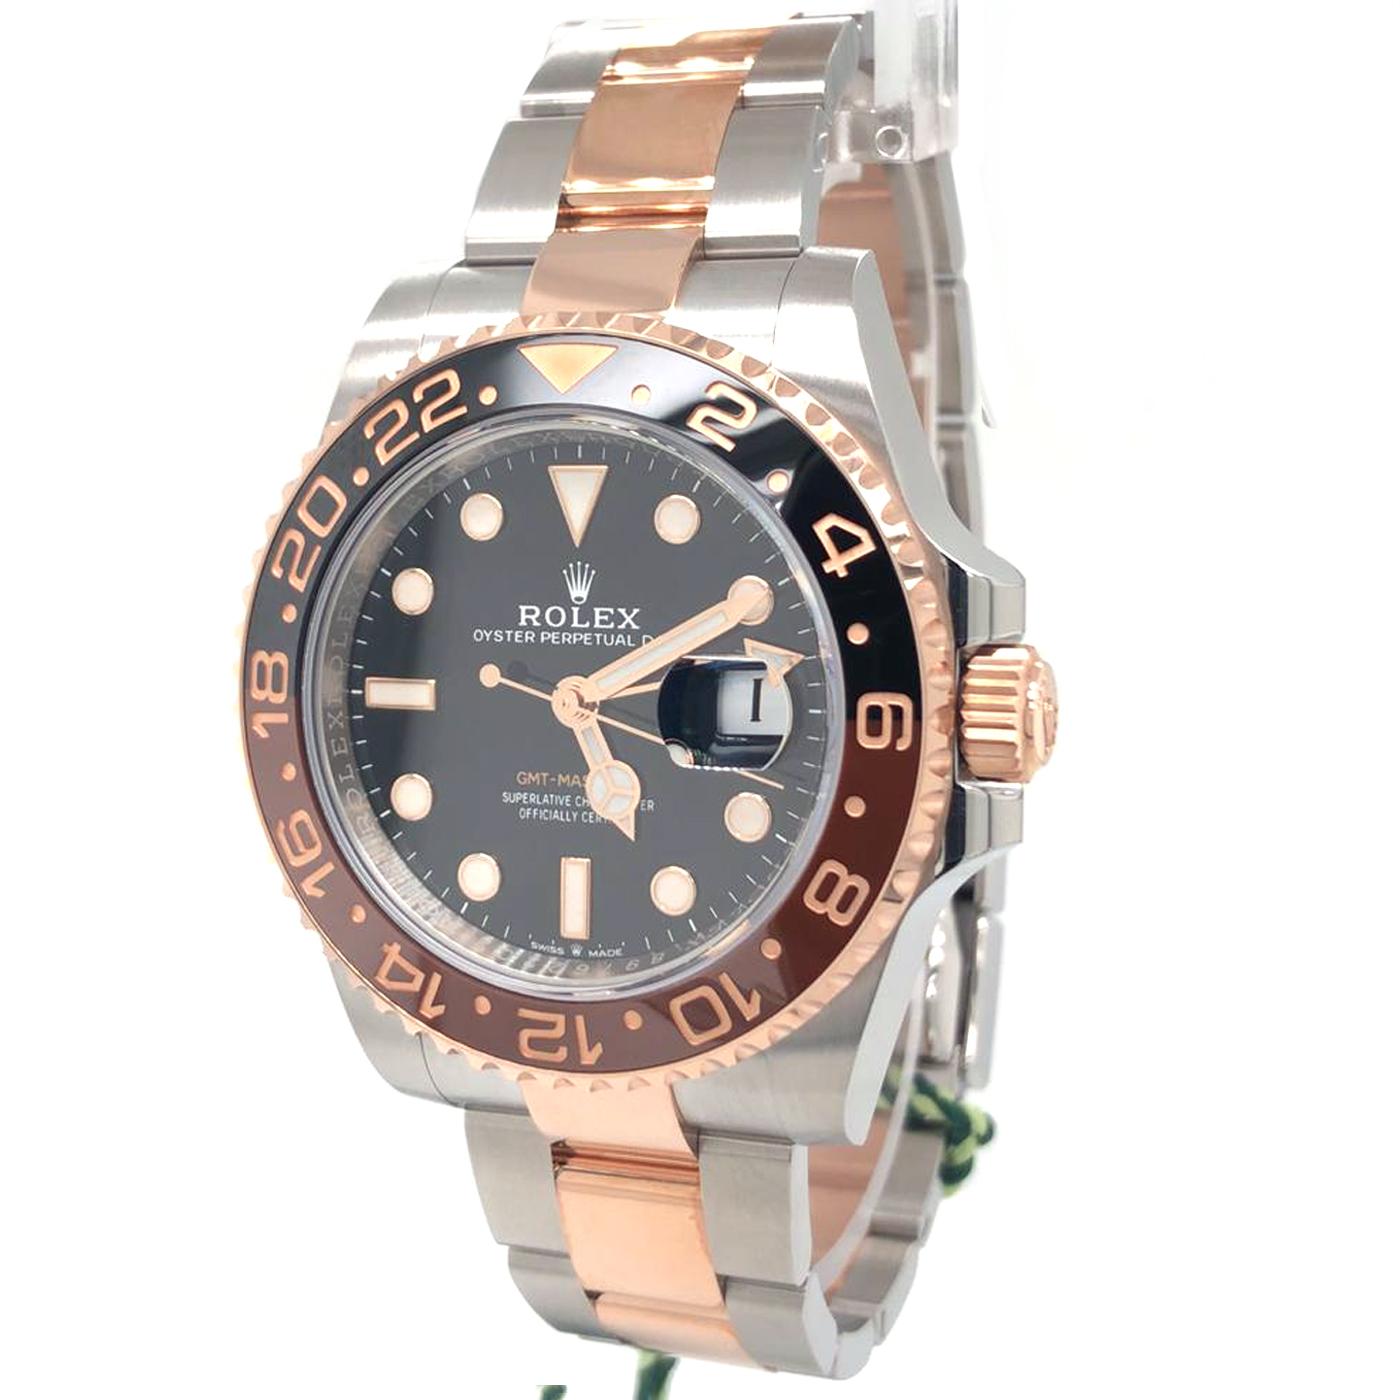 Rolex 126711 GMT-Master II 40mm Root Beer Black Dial Black/Brown Ceramic Bezel Stainless Steel and Rose Gold

Launched in 1954, the GMT Master (GMT = Greenwich Mean Time) was designed in collaboration with Pan American Airways. Having an accurate